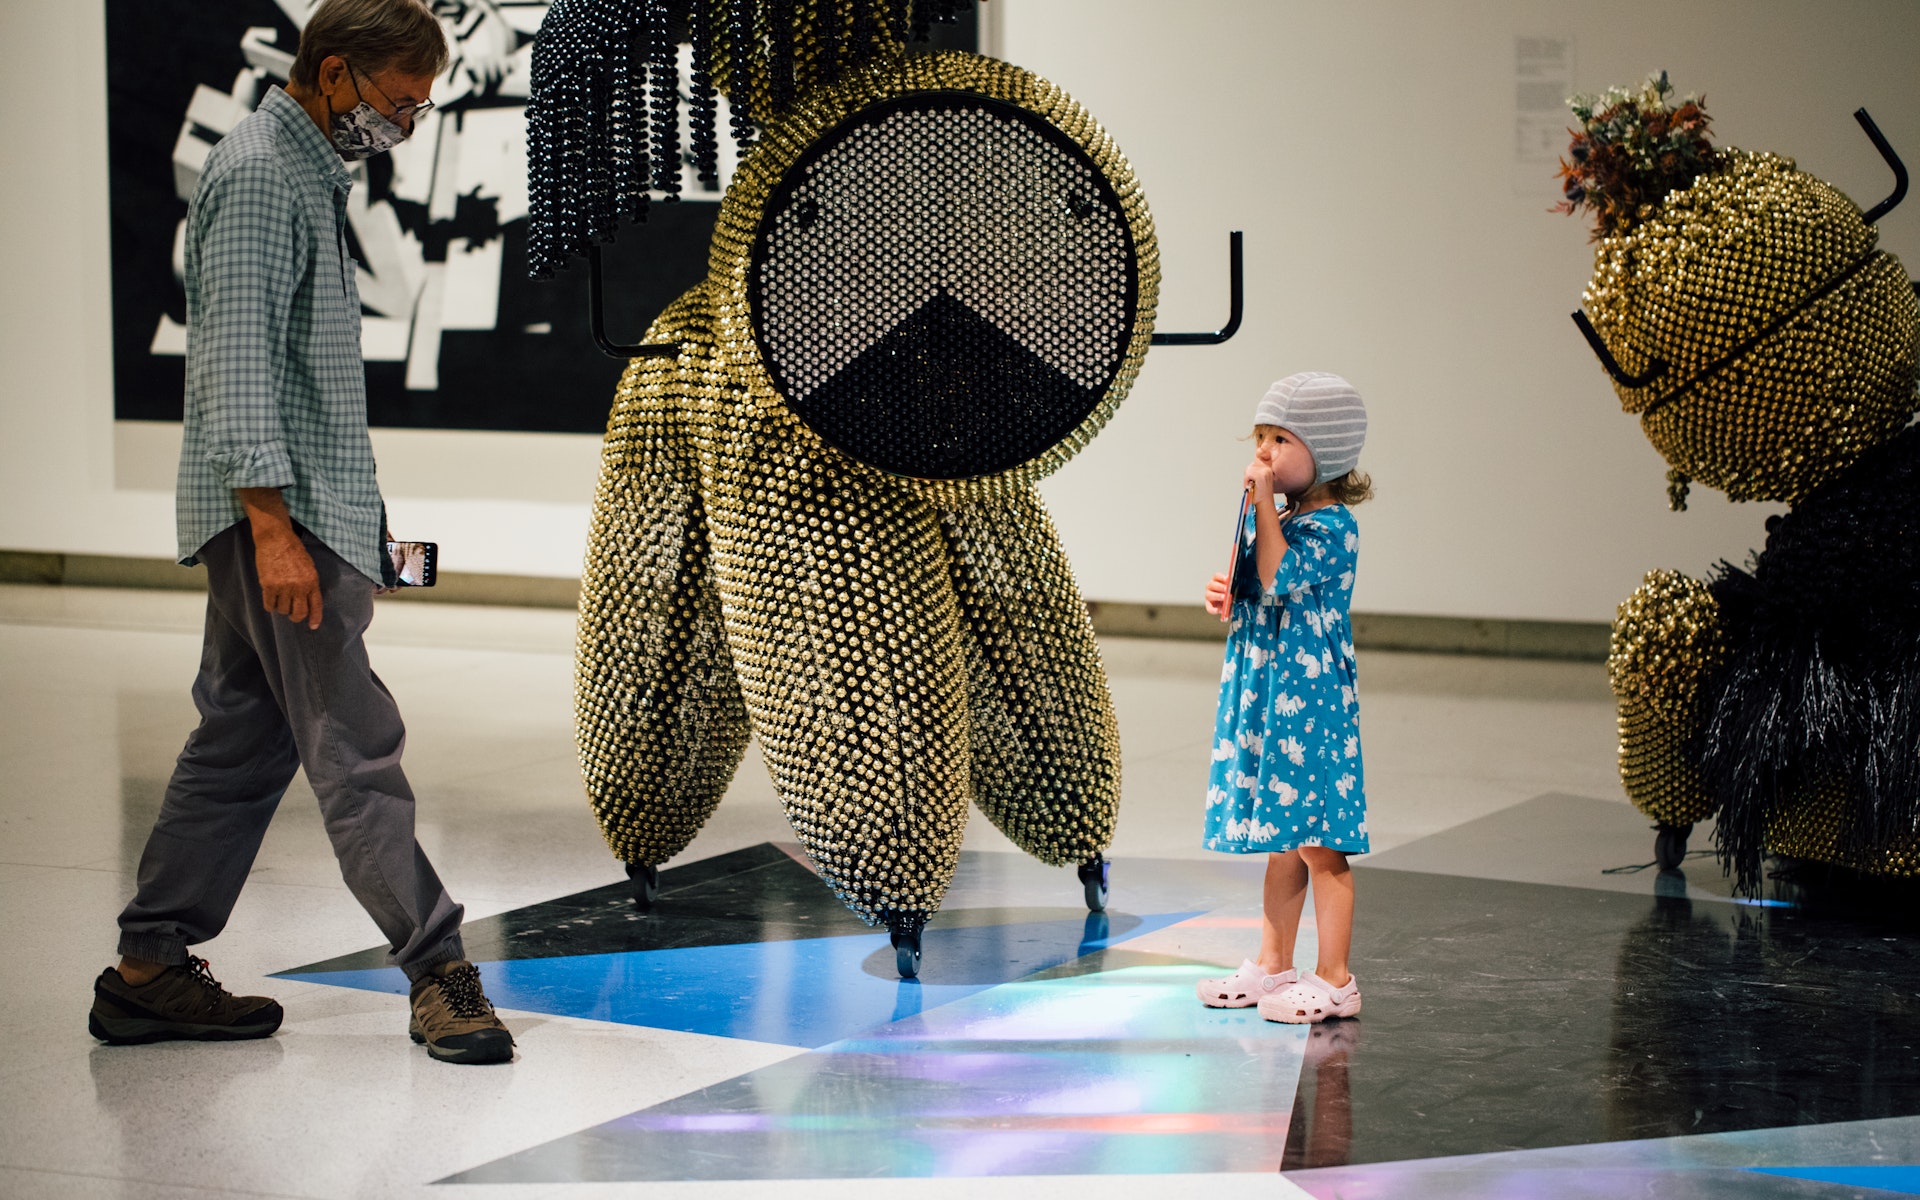 A child stands in a gallery with sculptures by an adult.